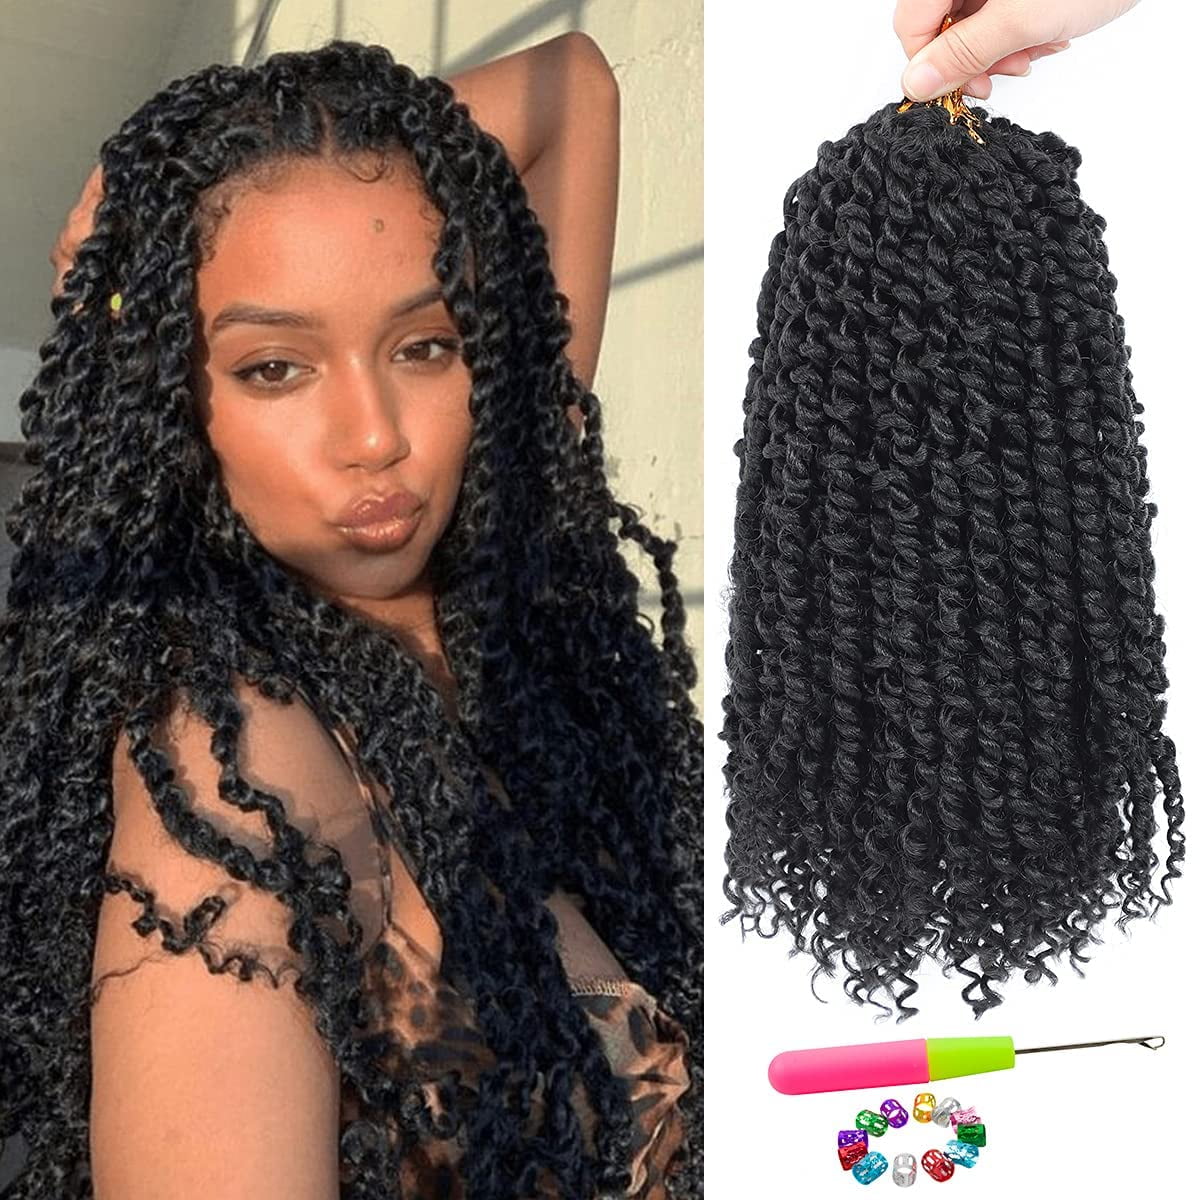 Passion Twist Hair - 8 Packs 14 Inch Passion Twist 14 Inch (Pack of 8) T30